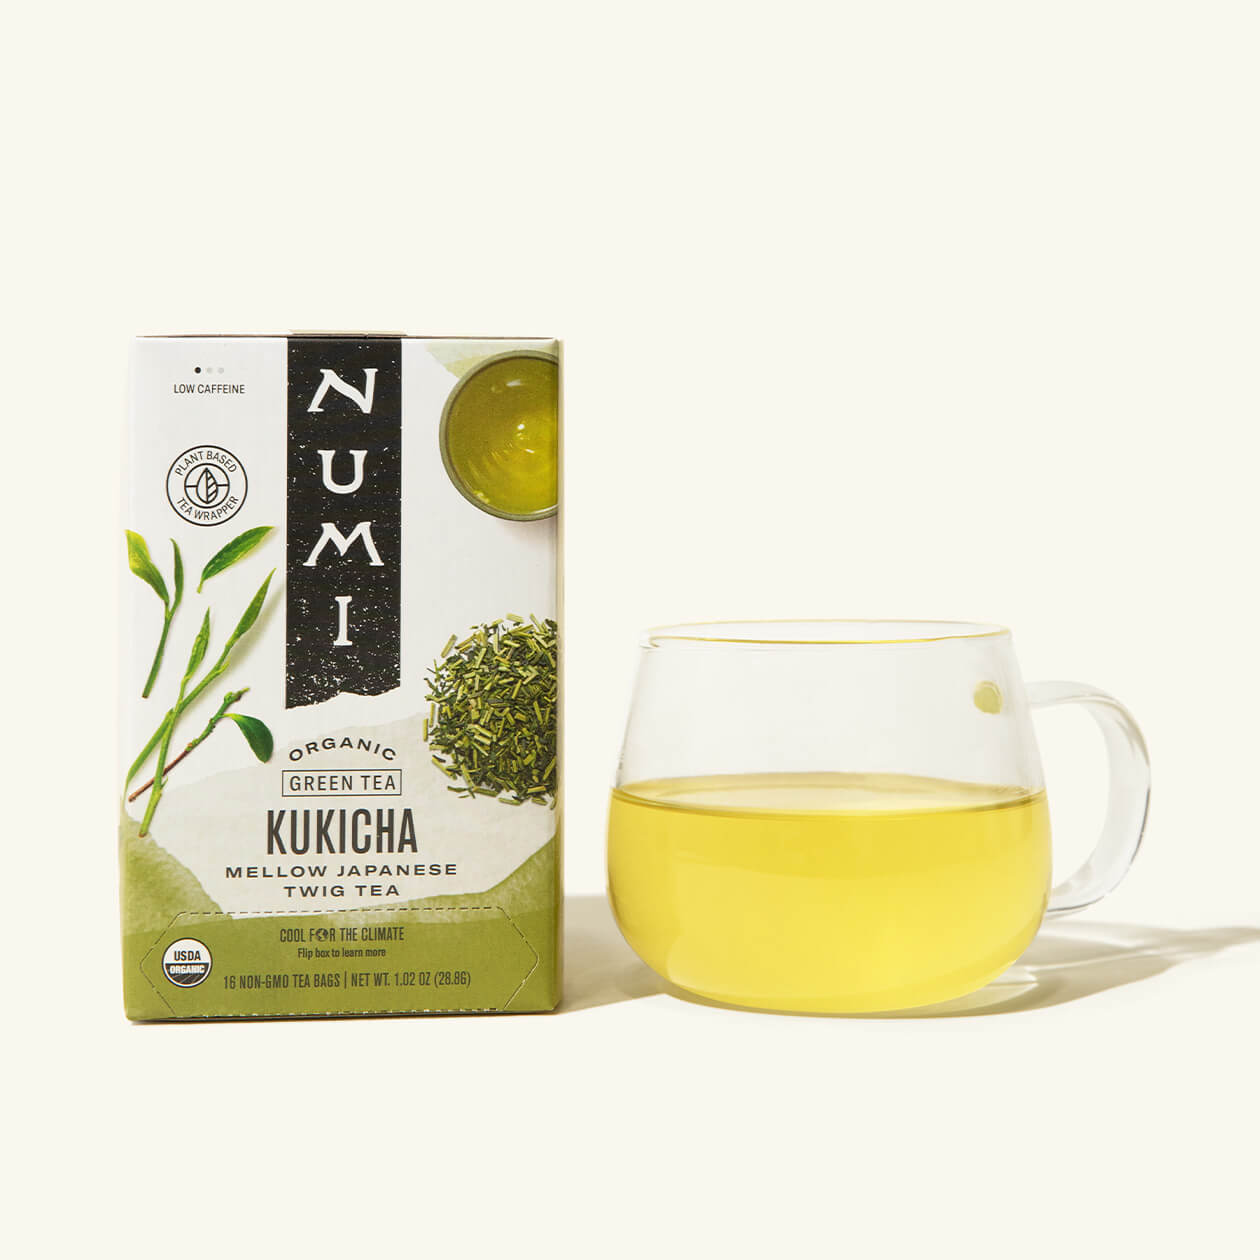 A box of Numi's Kukicha next to a brewed cup of tea in a clear cup